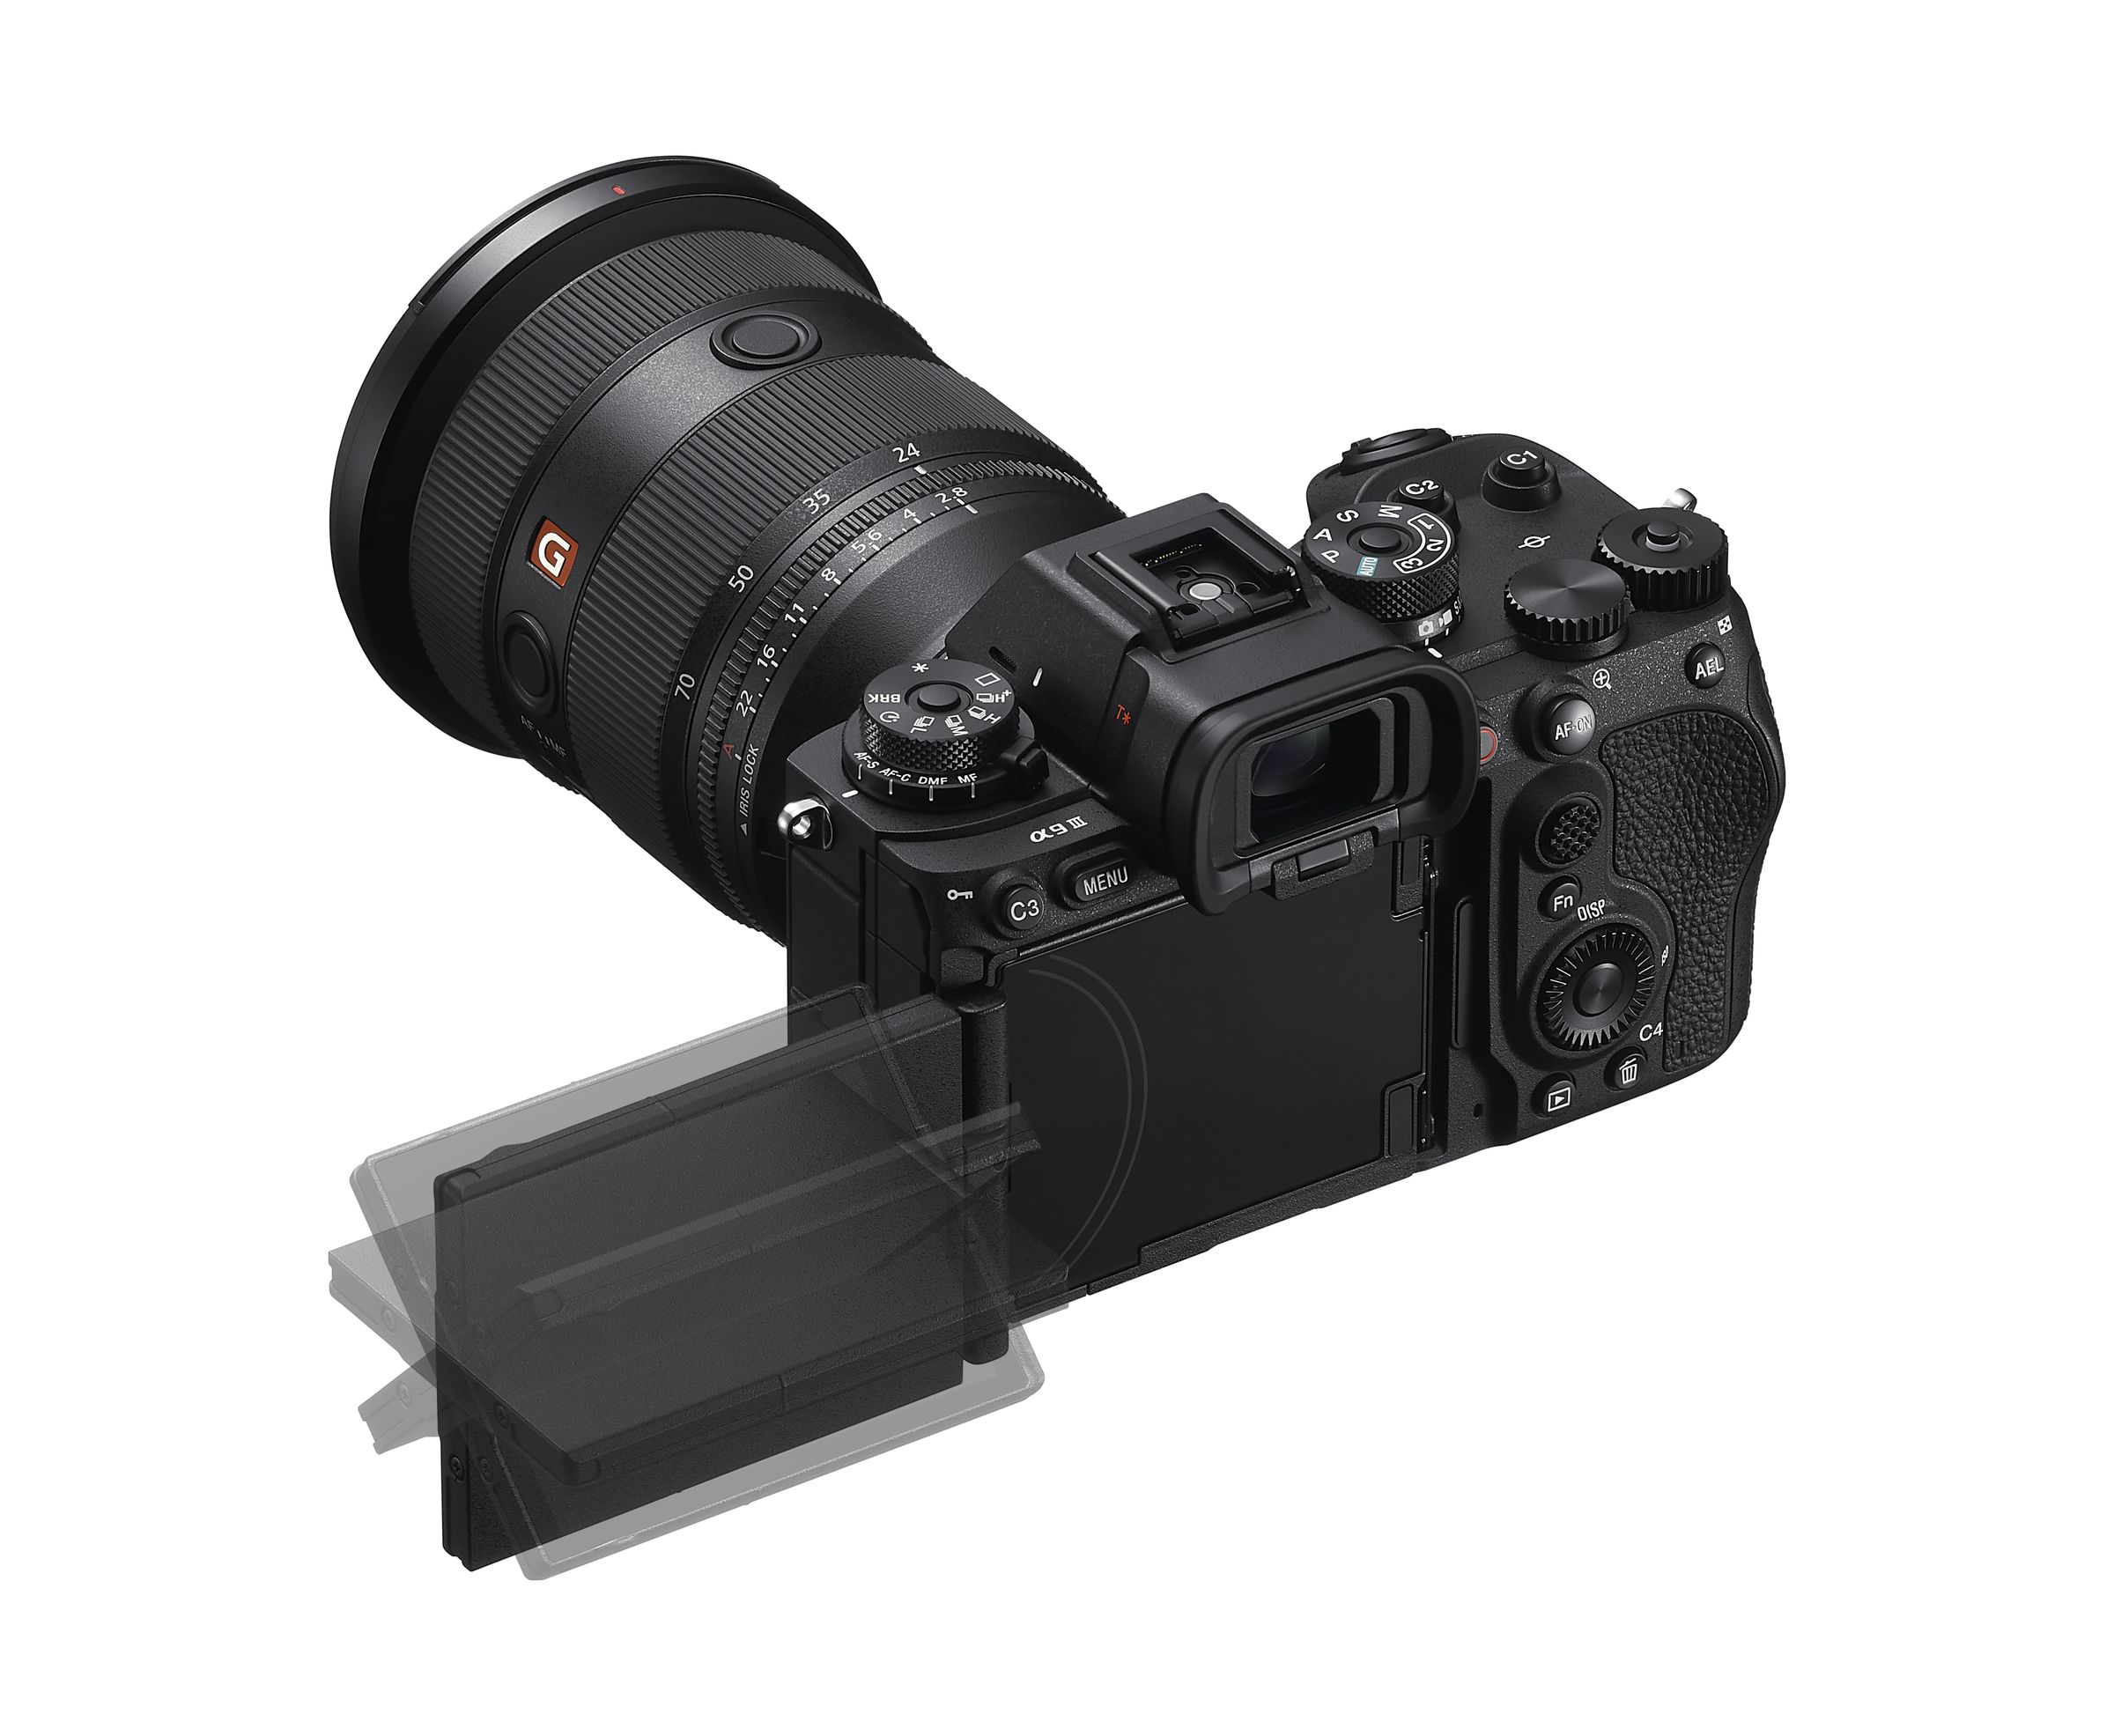 <em>The camera has a 4-axis LCD monitor.</em>